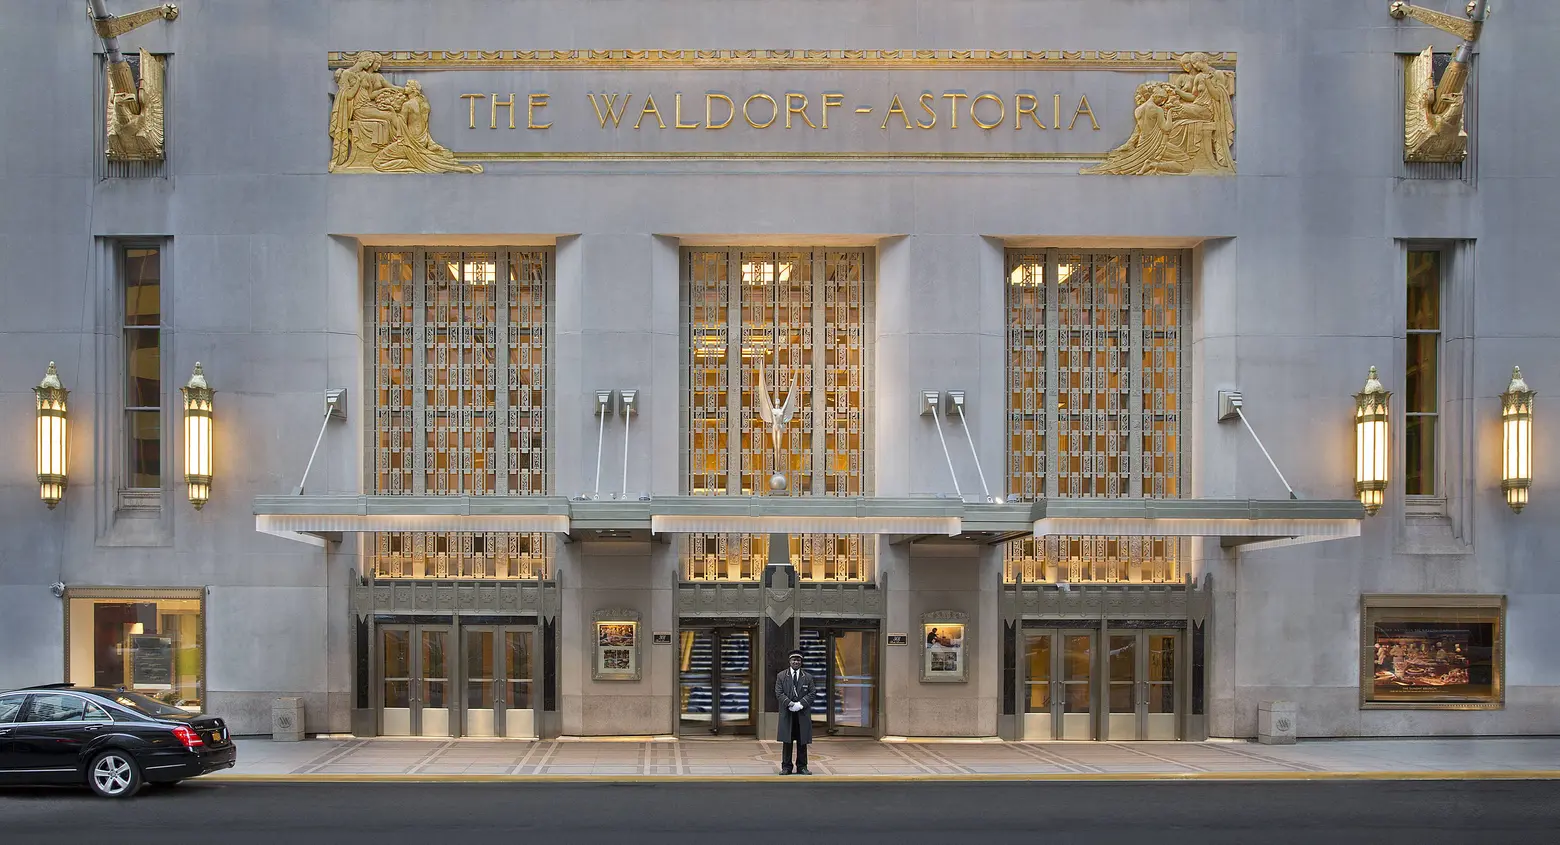 A new deal and more construction at Waldorf Astoria, though opening date is delayed